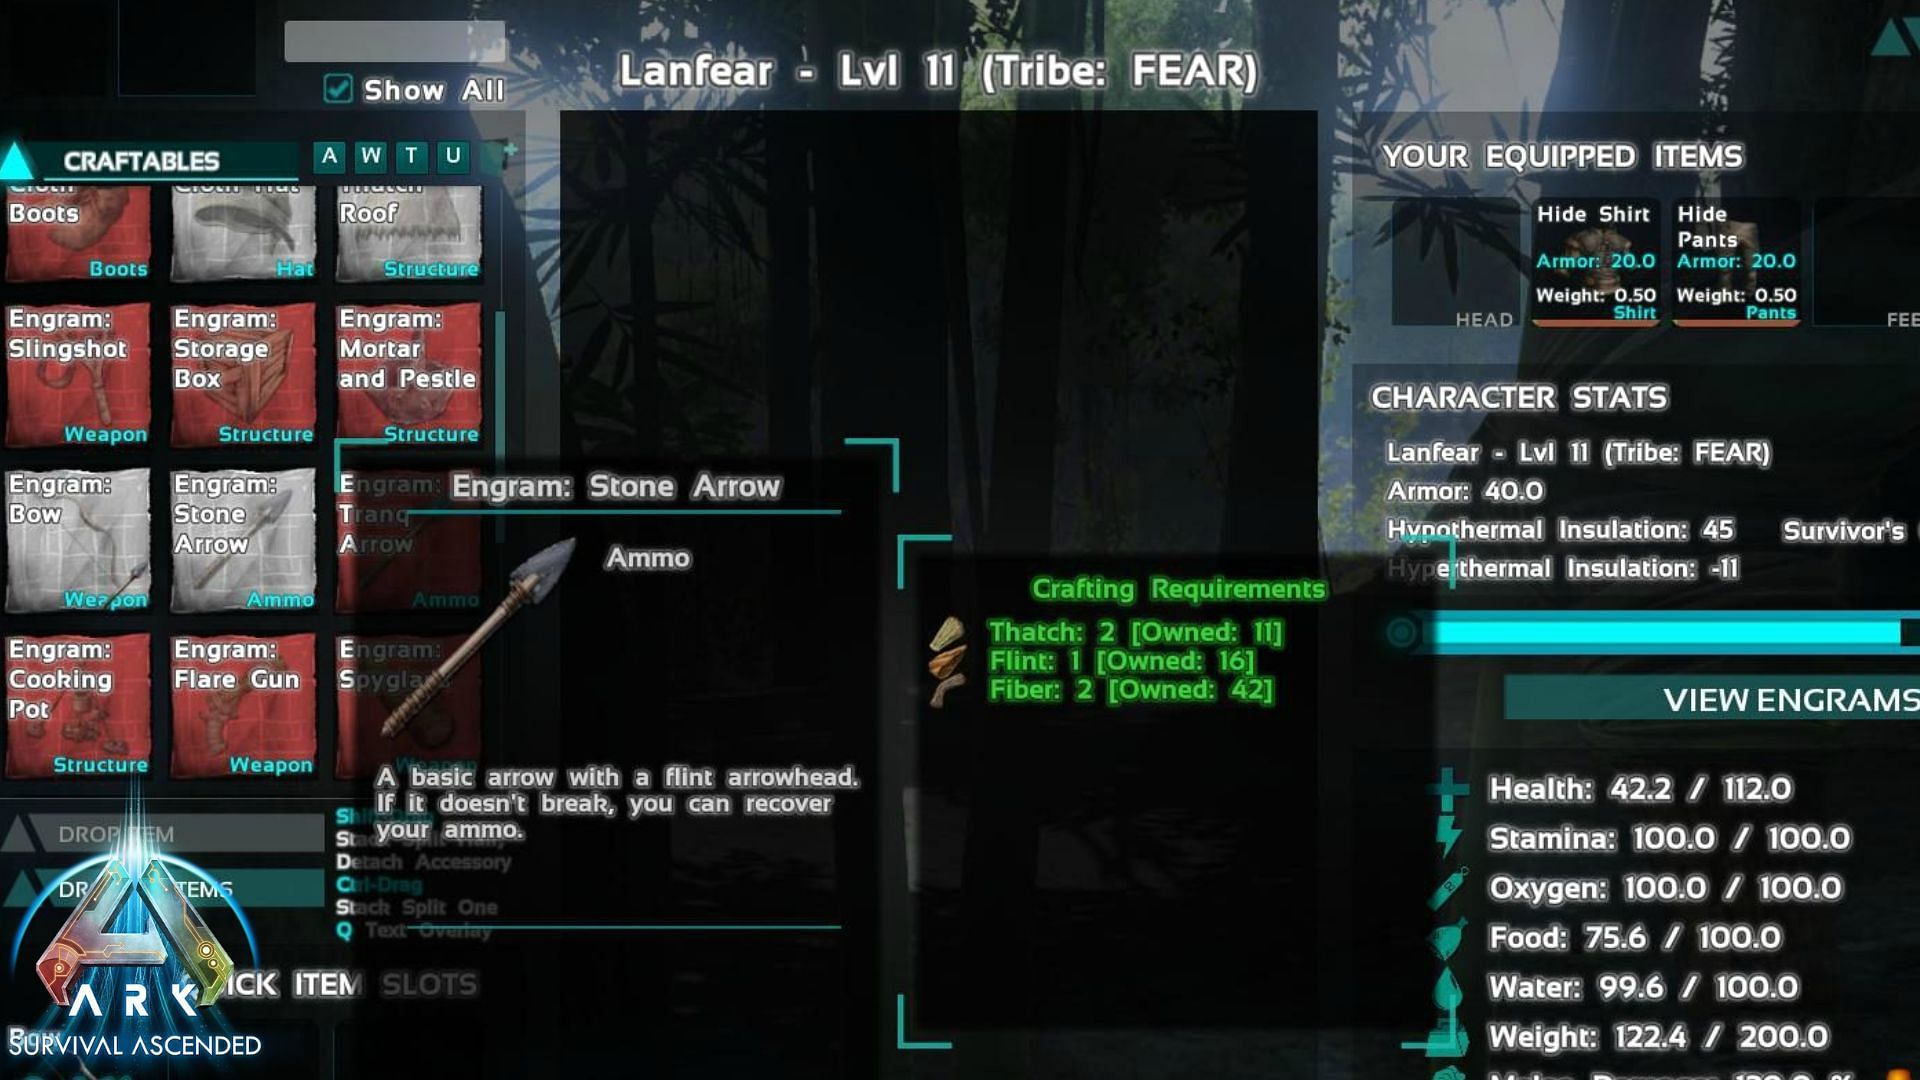 One must craft weapons to increase their chances of survival in ARK Survival Ascended (Image via Studio Wildcard)